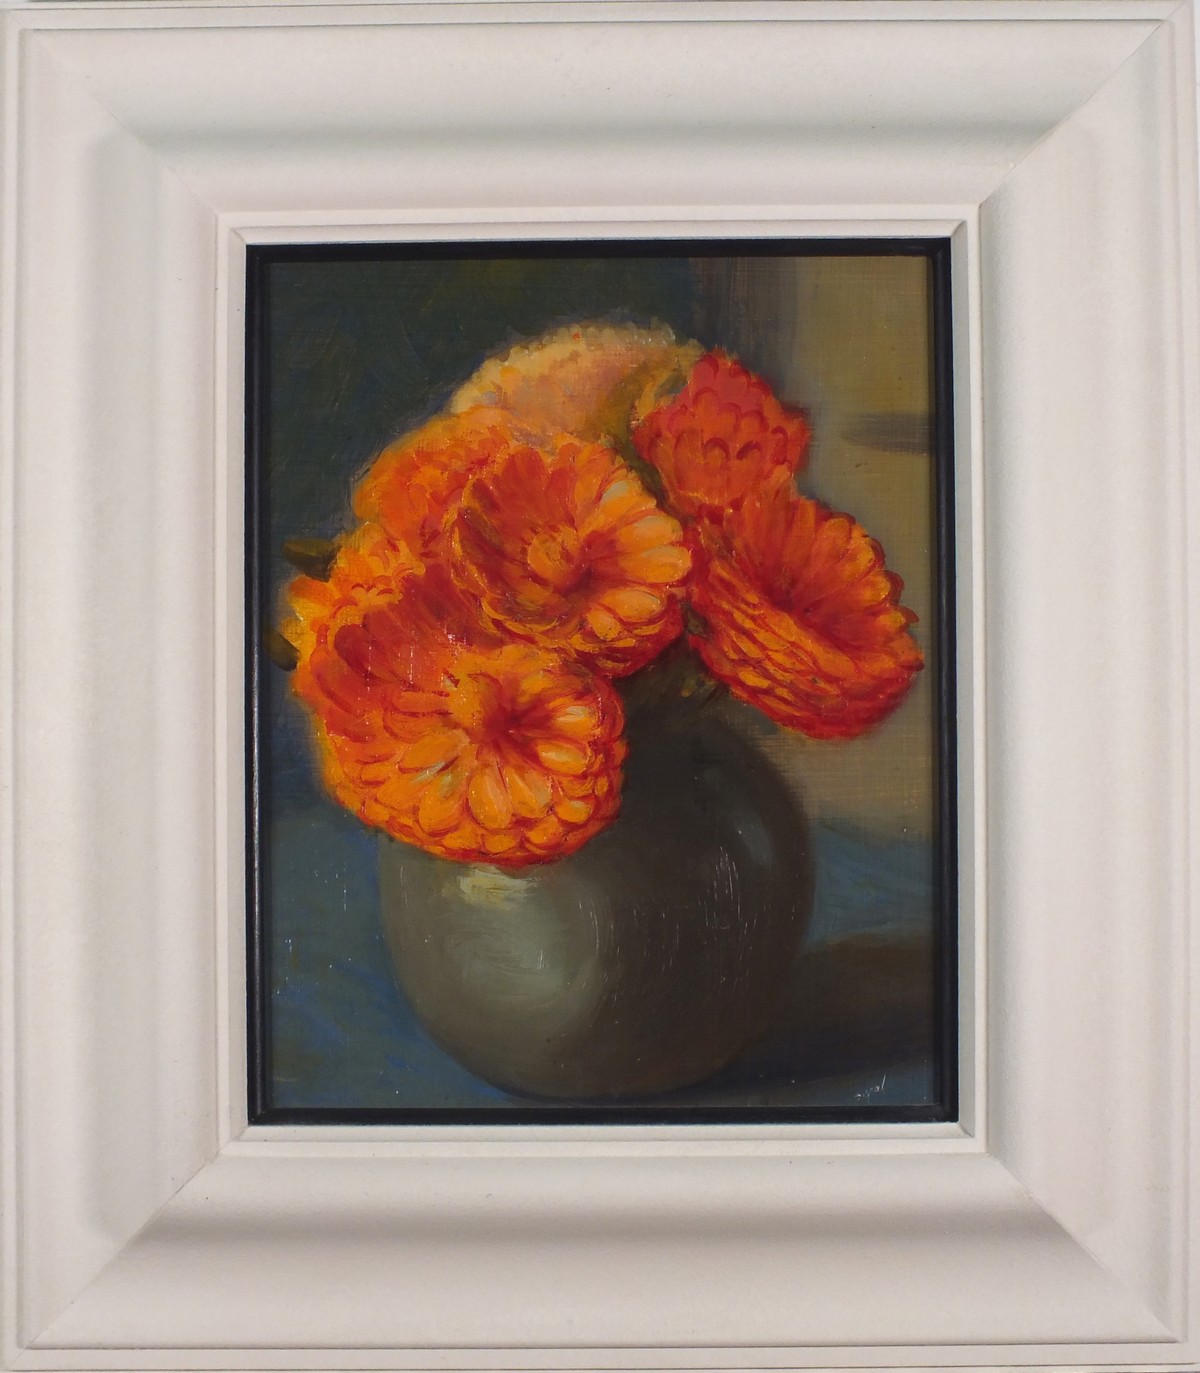 Hyman SEGAL (British 1914-2004) Marigolds in a Vase, Oil on board, Signed lower right, artist's - Image 2 of 3